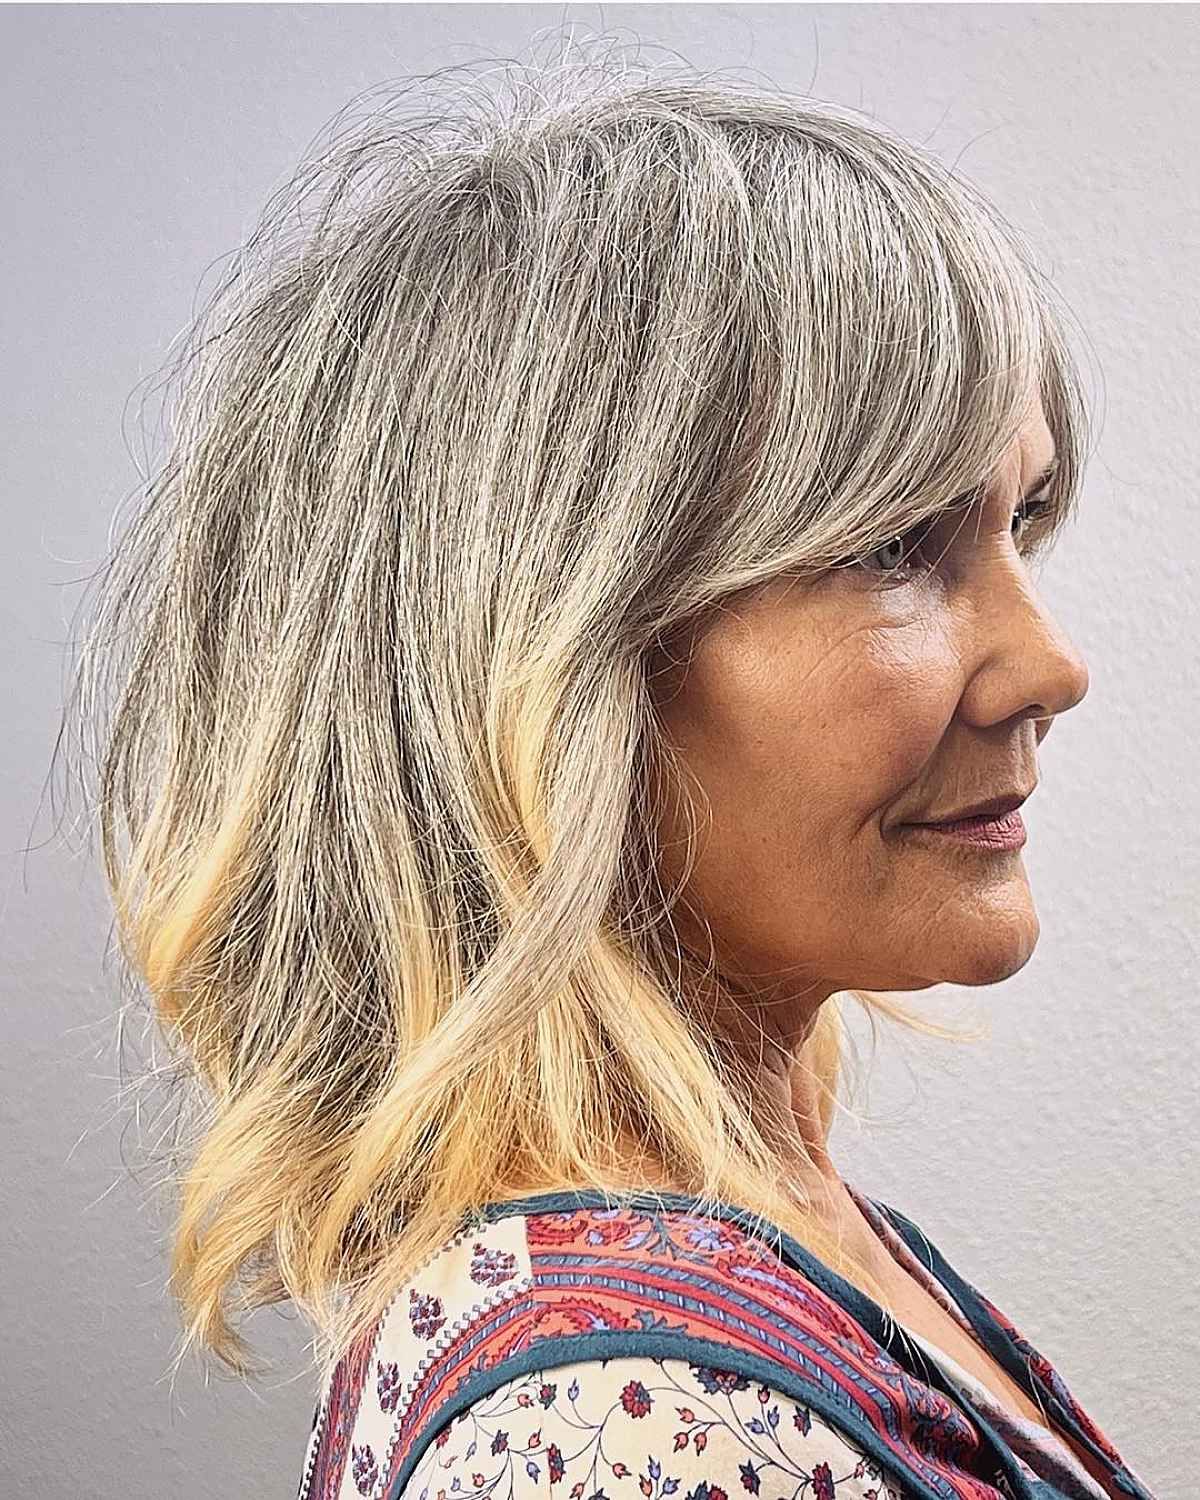 21 Modern Medium Shaggy Hairstyles Women Over 60 Can Pull Off Throughout Medium Haircut With Shaggy Layers (View 10 of 25)